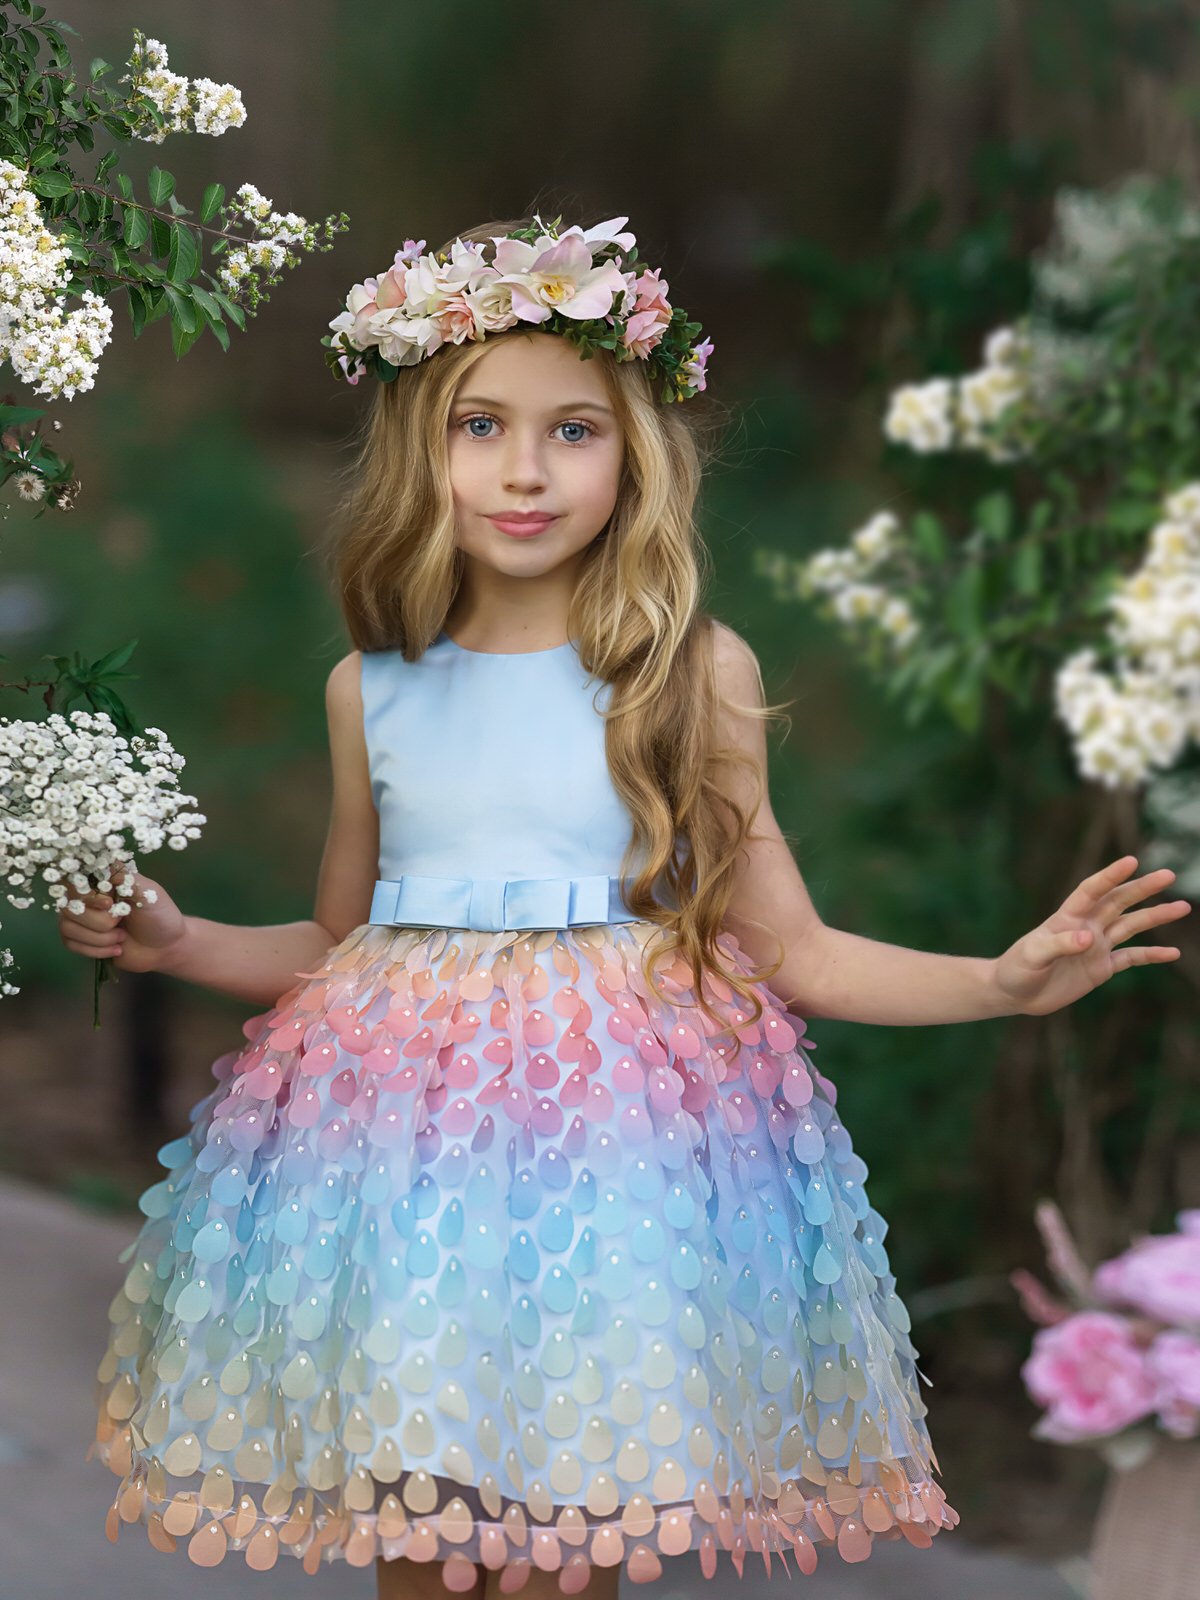 Little Girls Spring/Summer Formal And Dressy Outfits - Mia Belle Girls